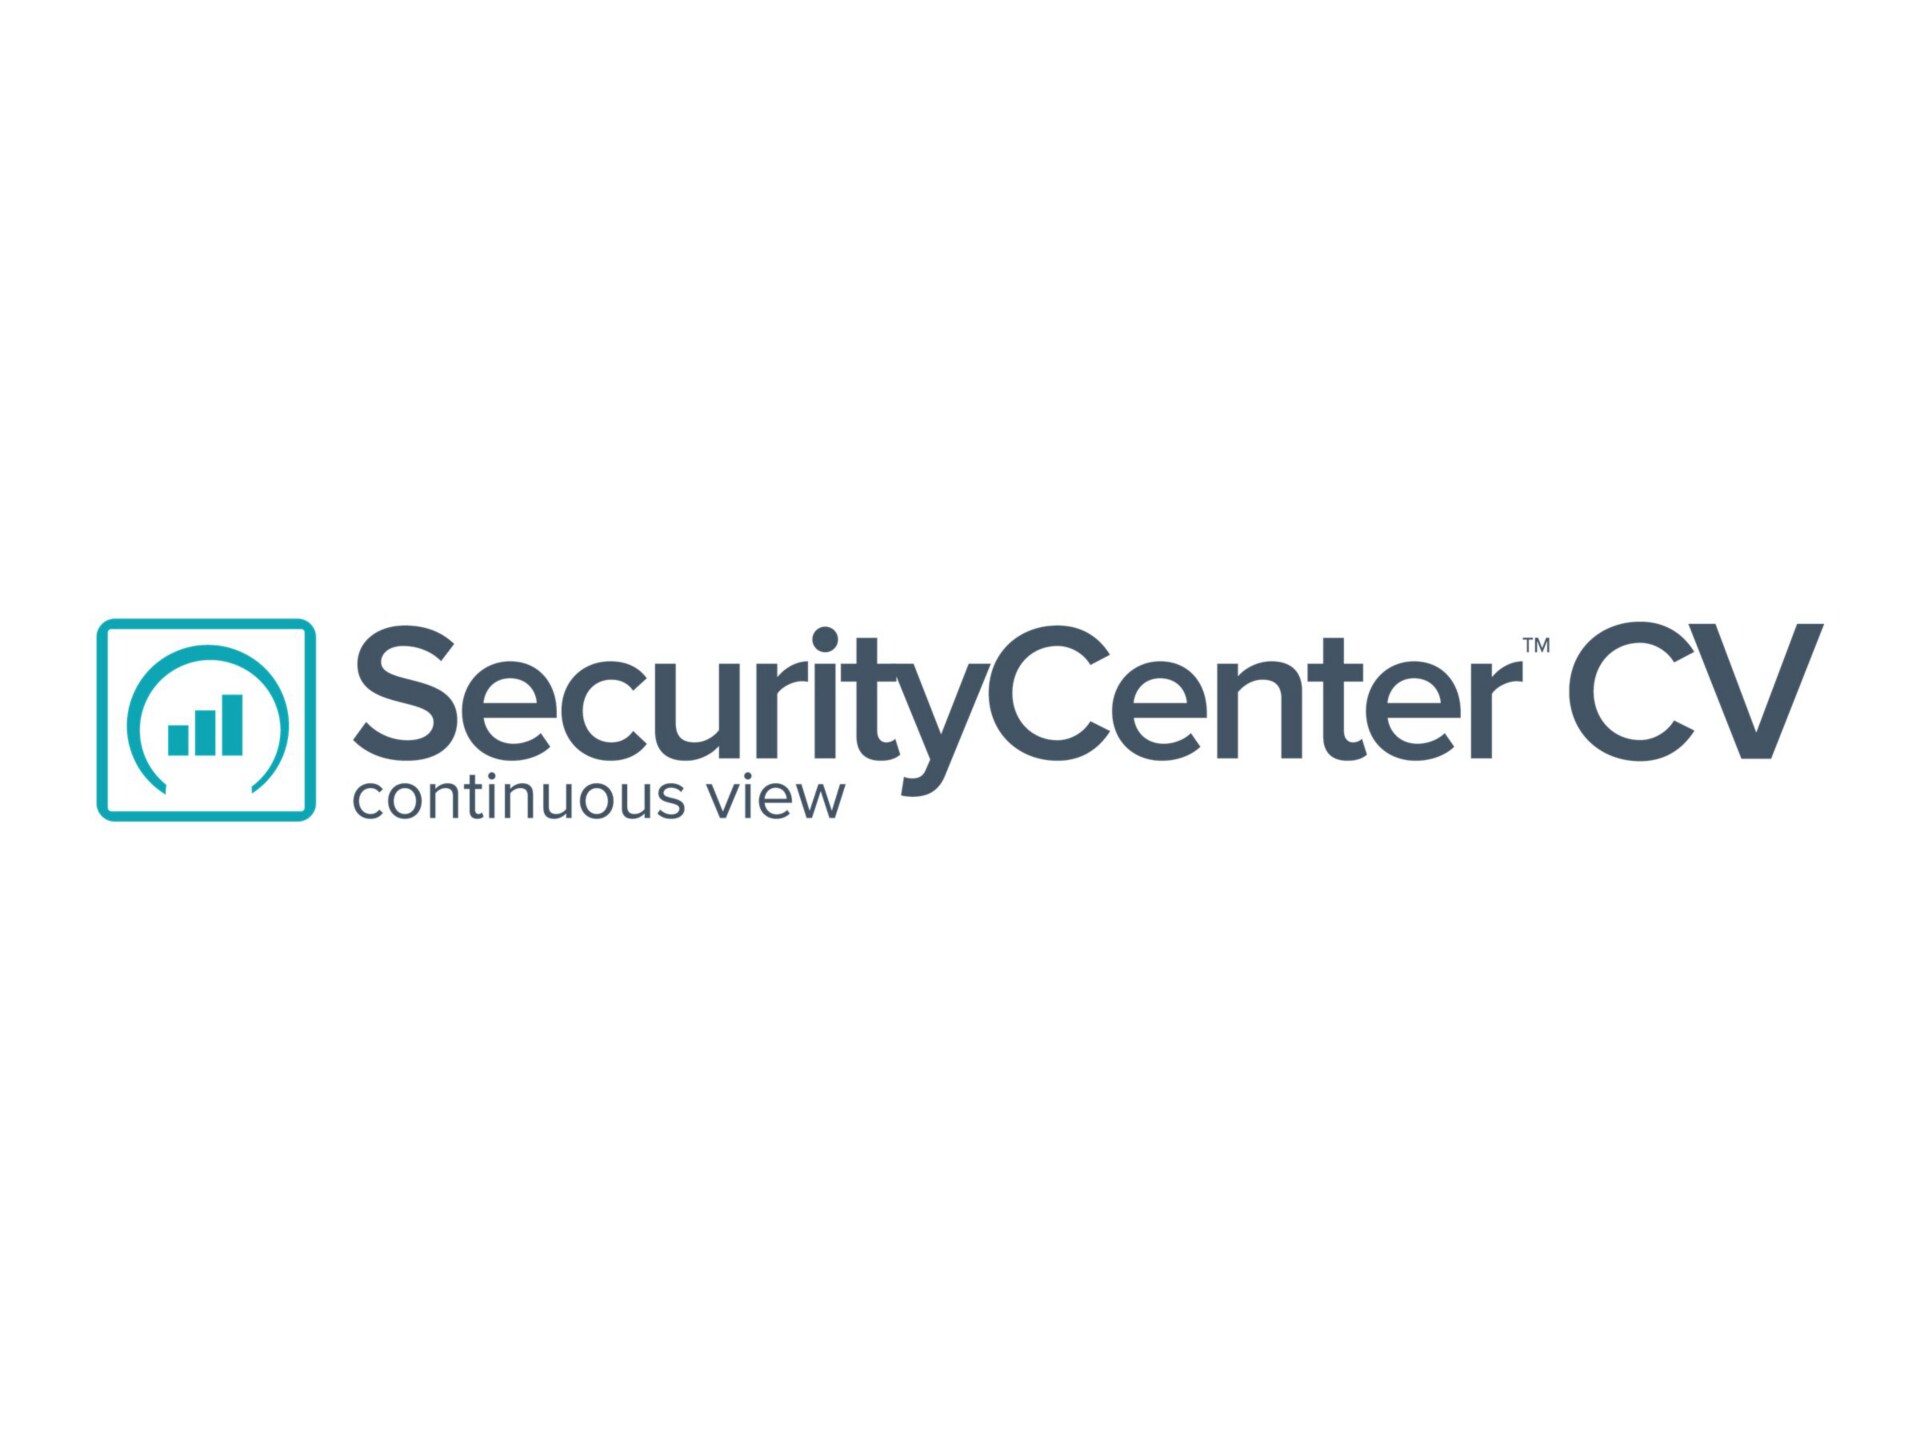 Security Center Continuous View - annual subscription (renewal) (1 year) - 1 GB capacity/day, 5 TB managed capacity, 512